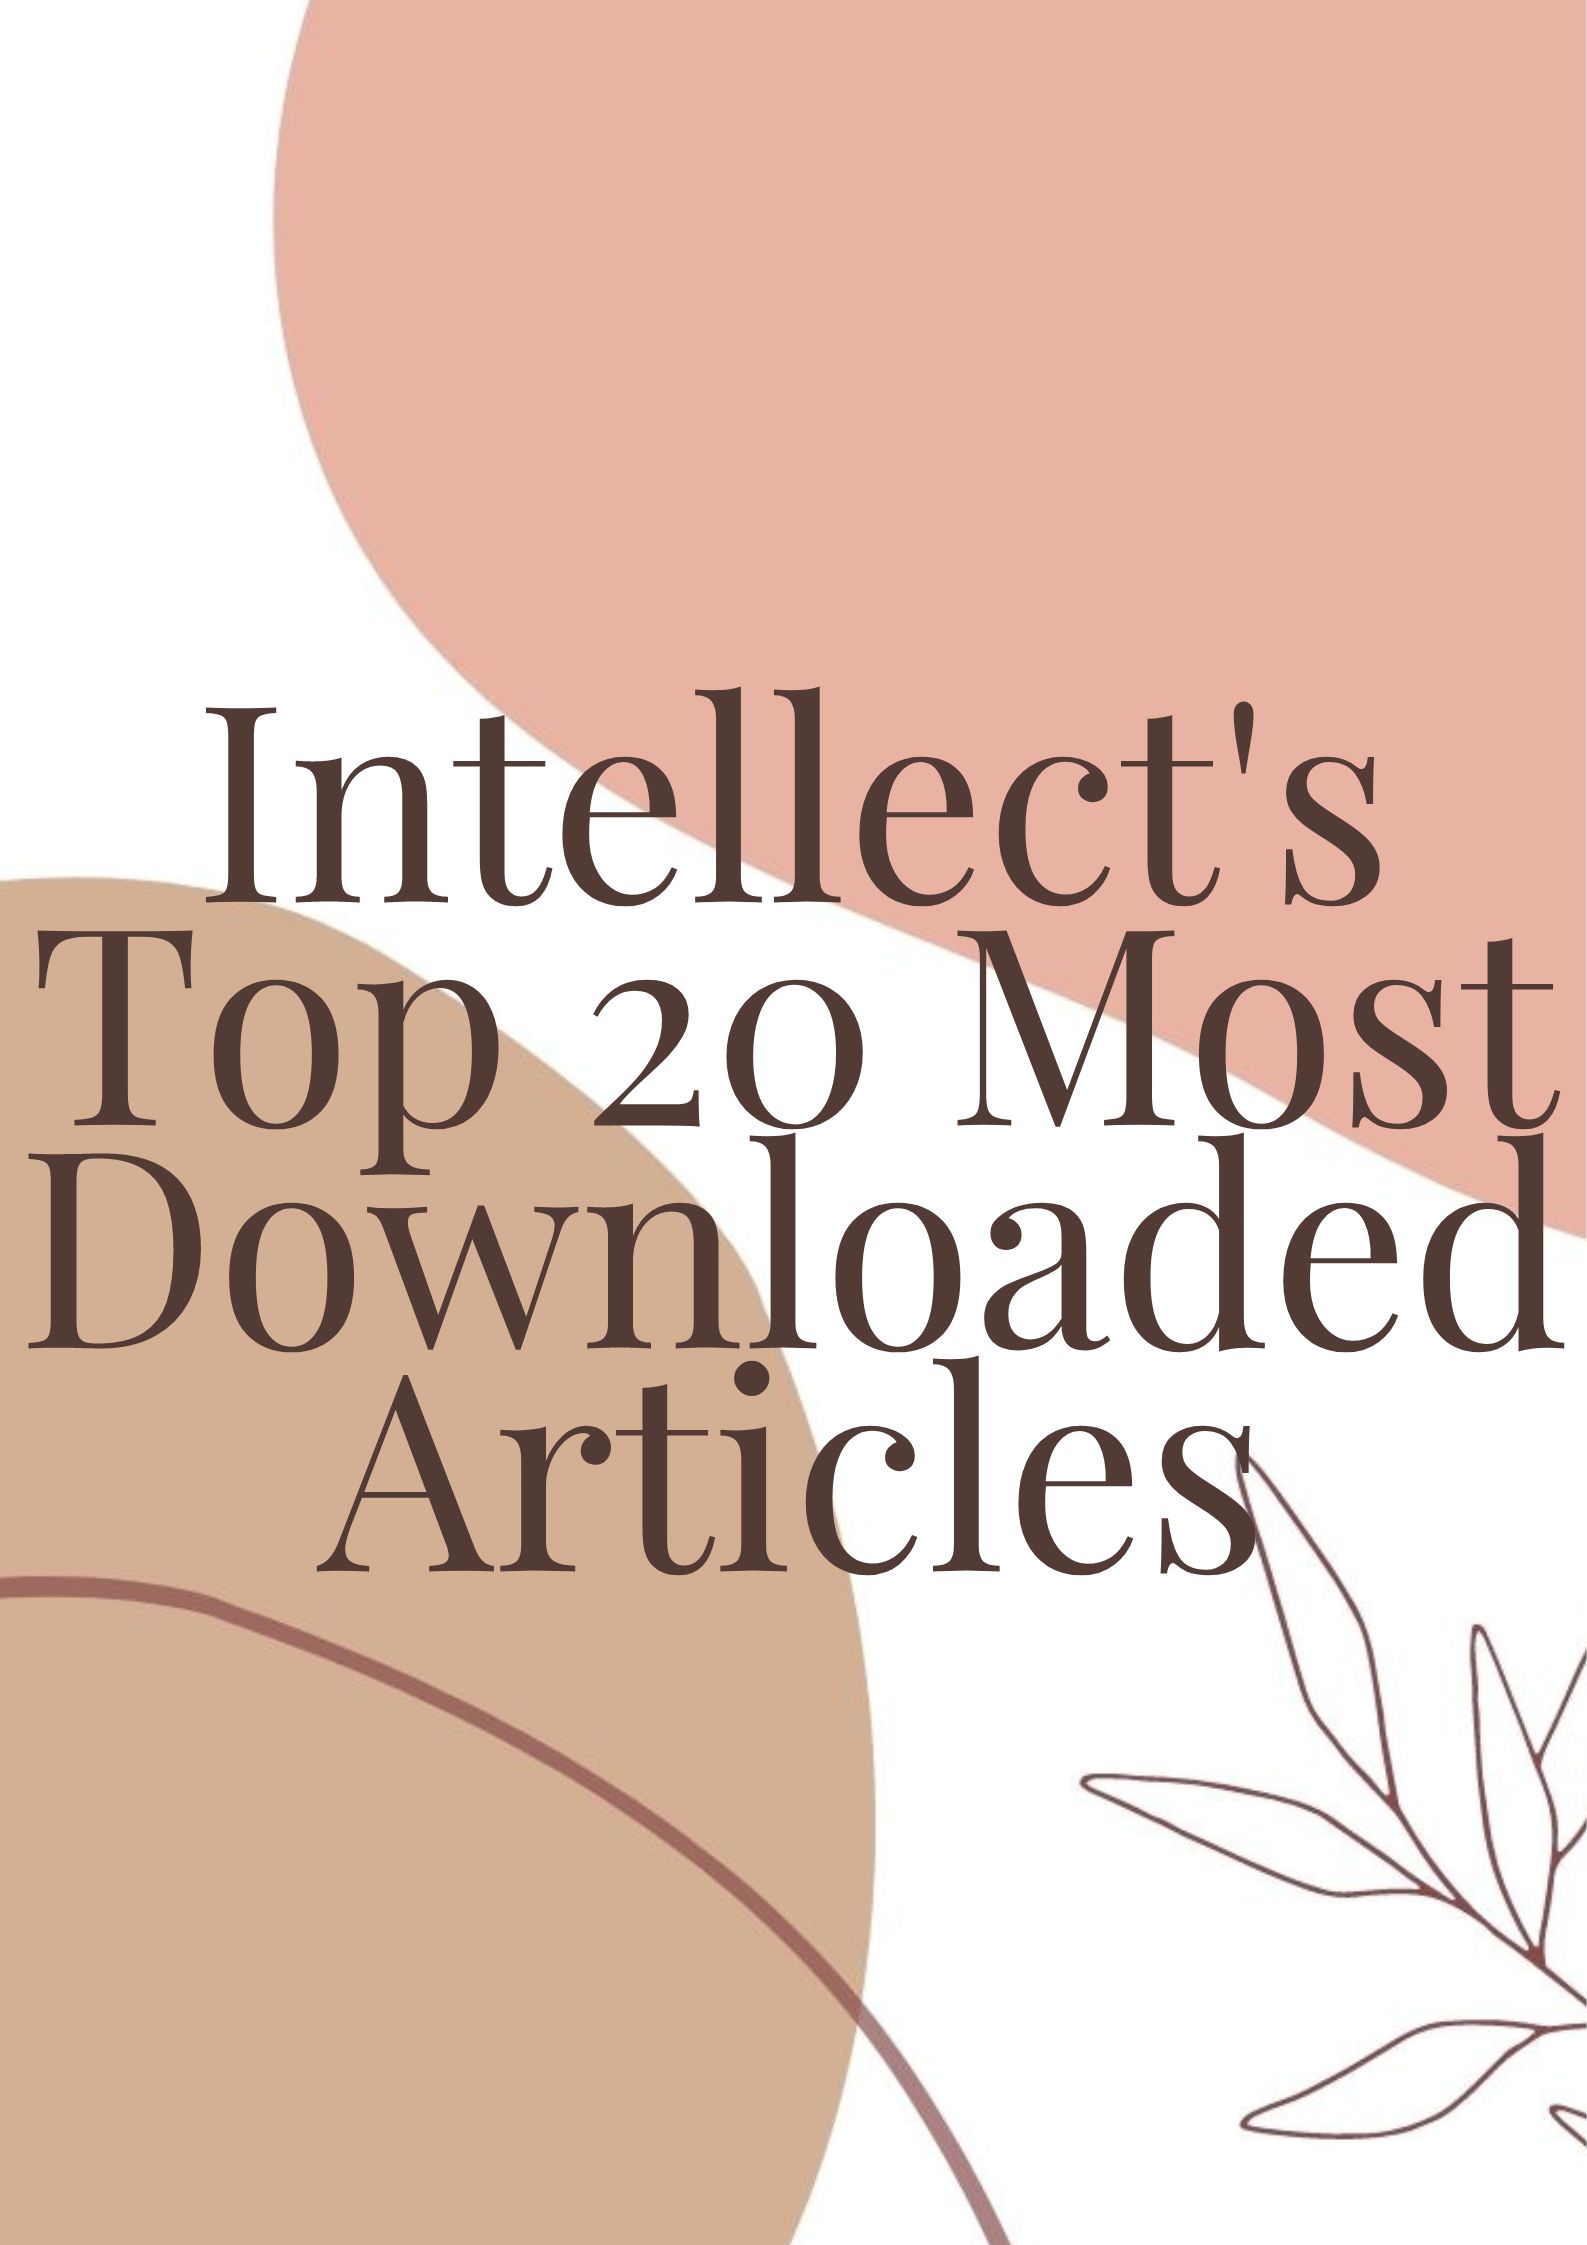 Our Top 20 Most Downloaded Articles!